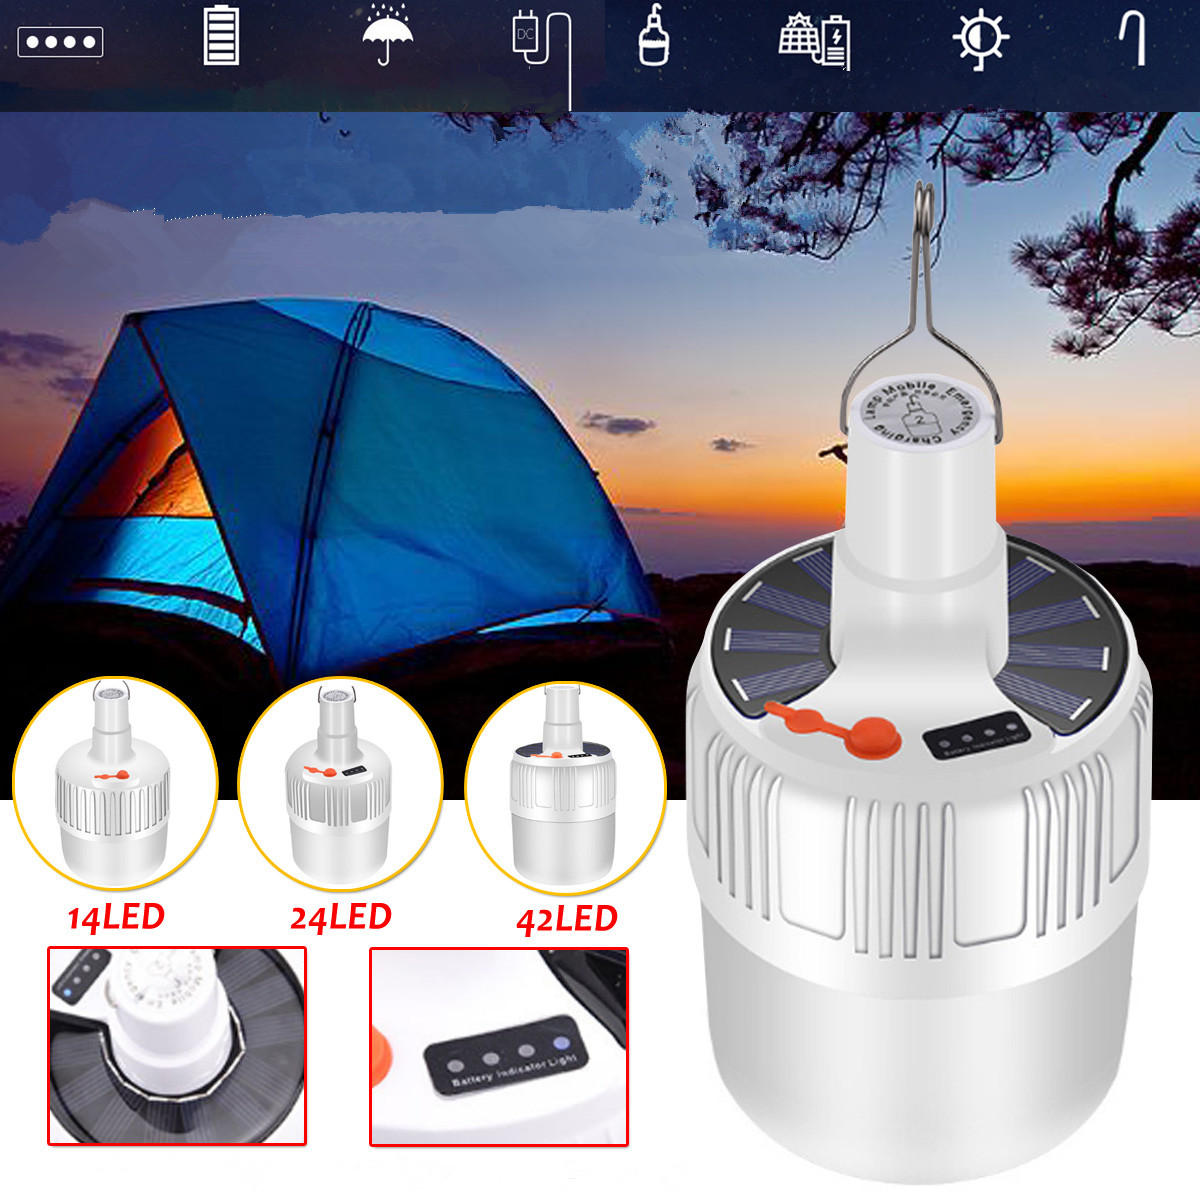 14/24/42 LED USB Rechargeable Solar Panel Powered Emergency Lamp Camping Light